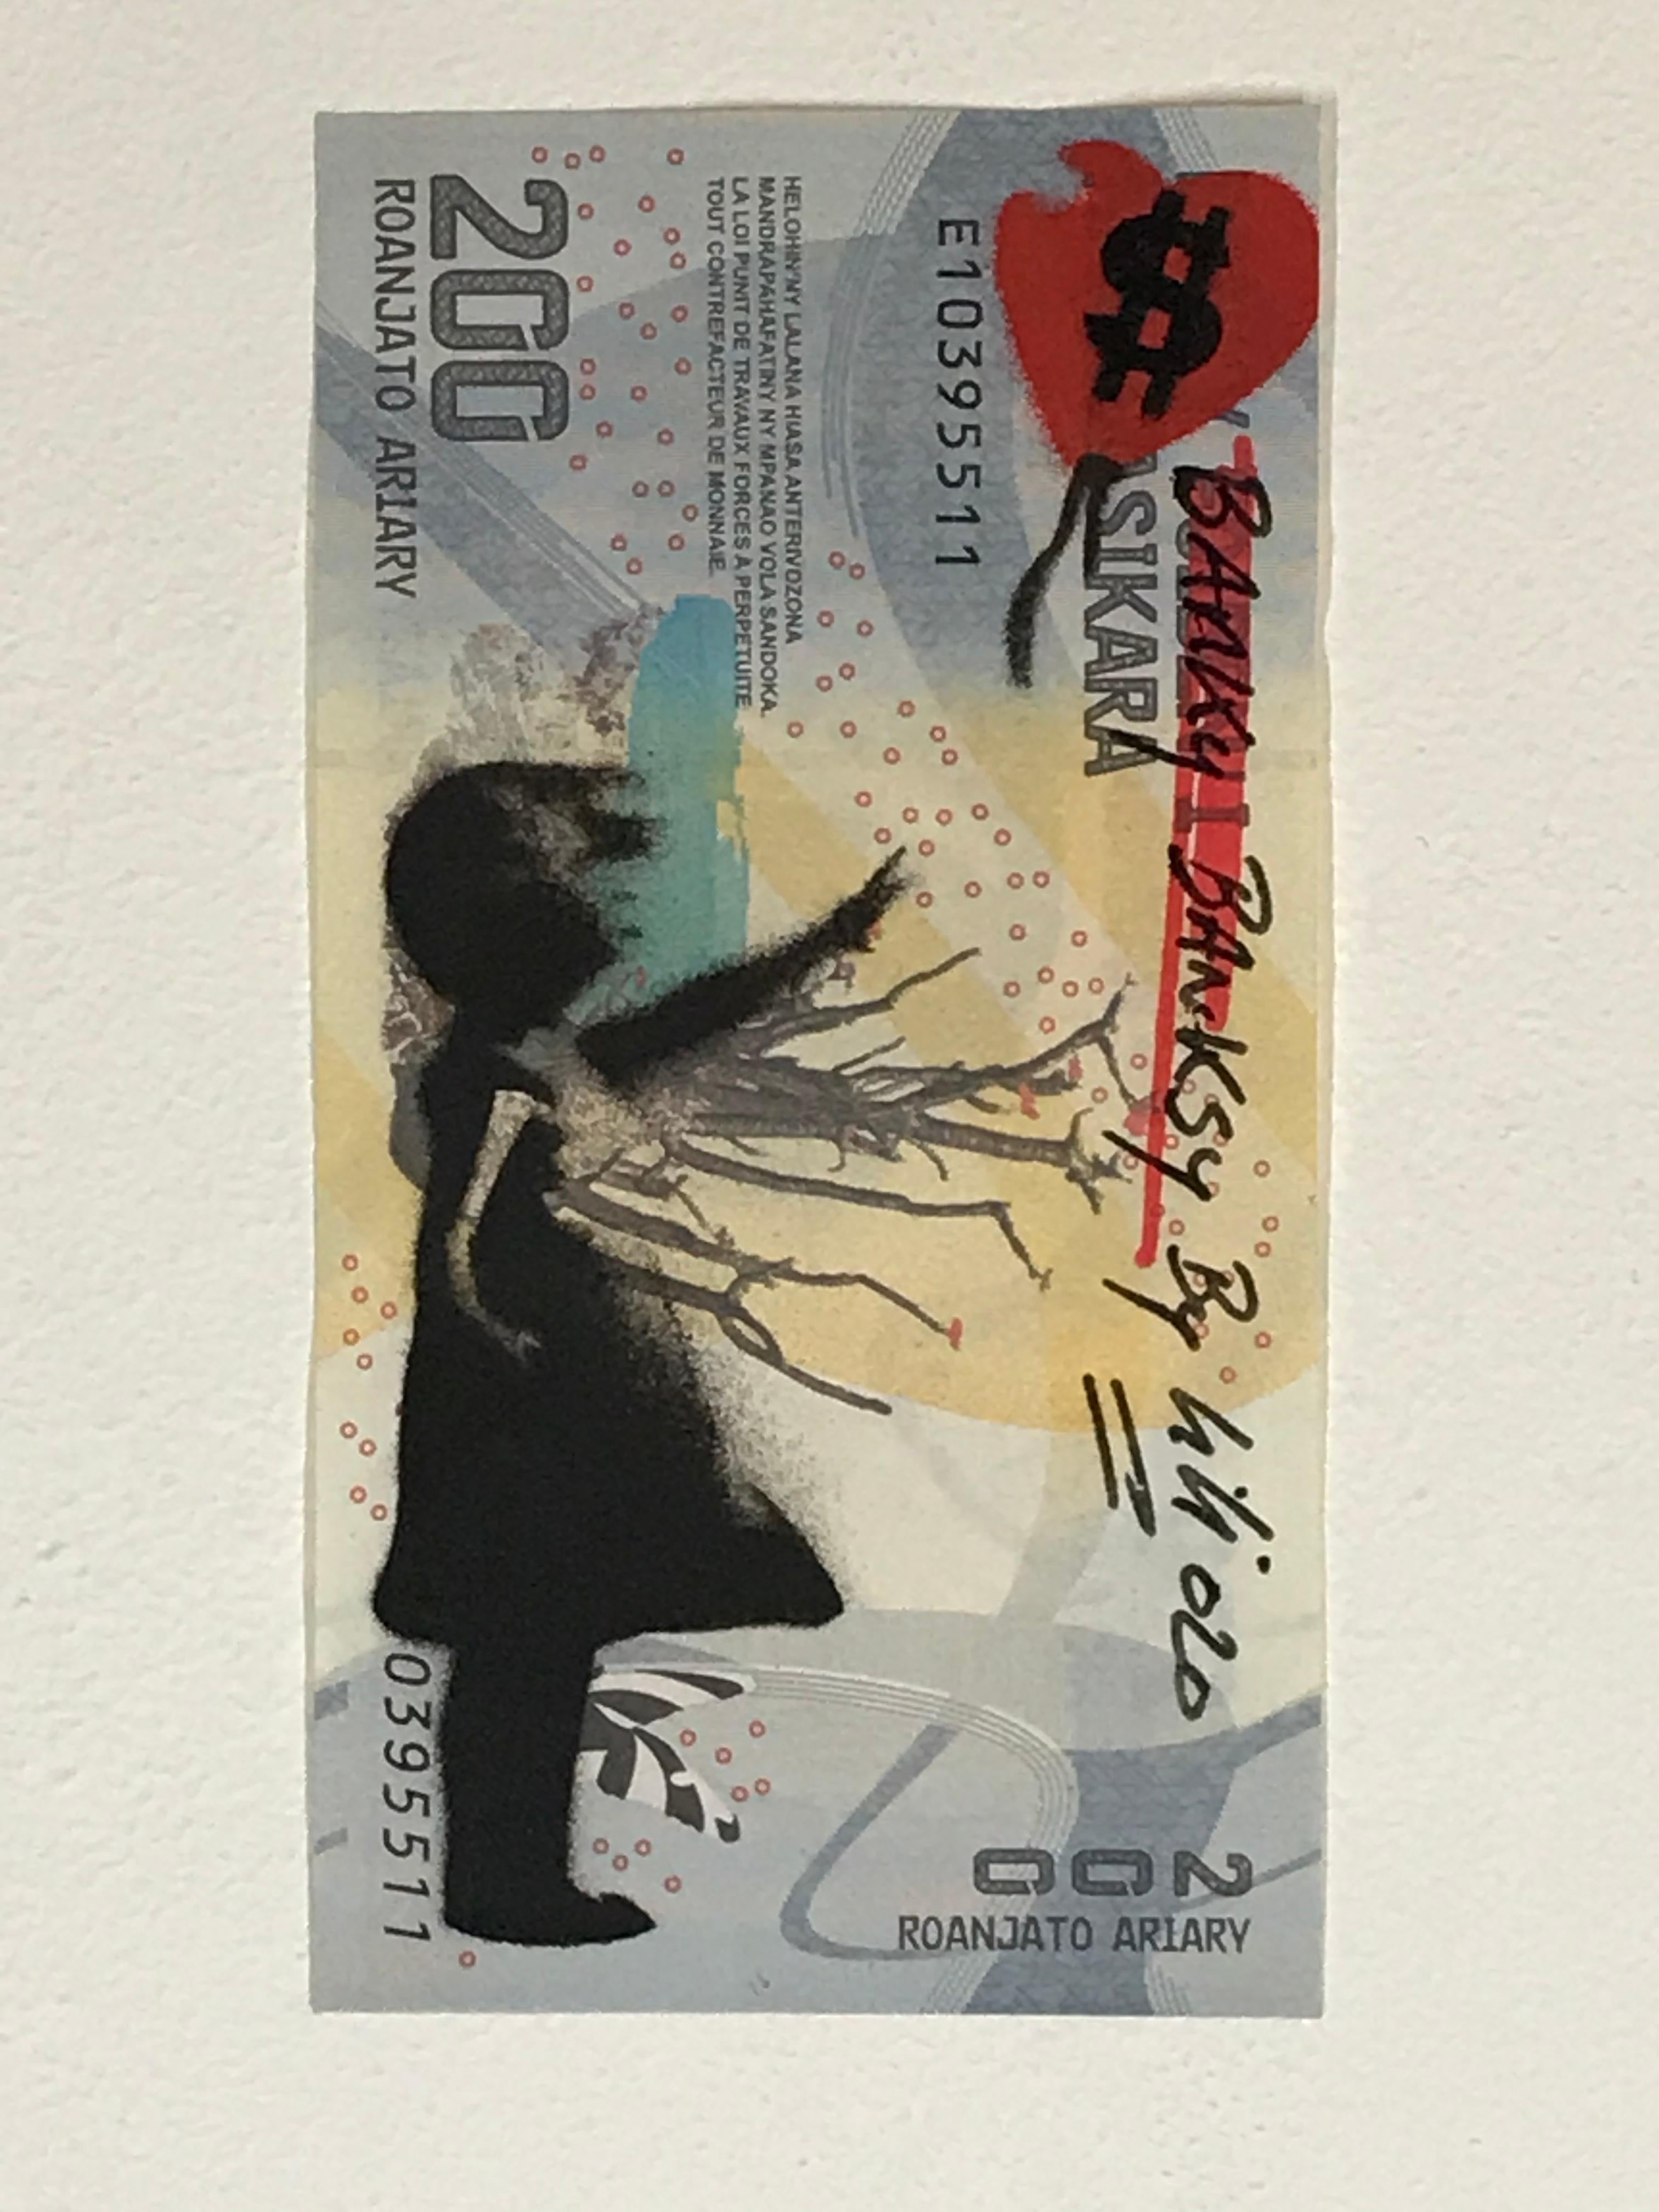 
"Banky-Banksy-by KIKI" gris - 2020
small stencil on Malagasy banknotes - 100 banknote
6 x 11.4 cm (countersigned on the back)